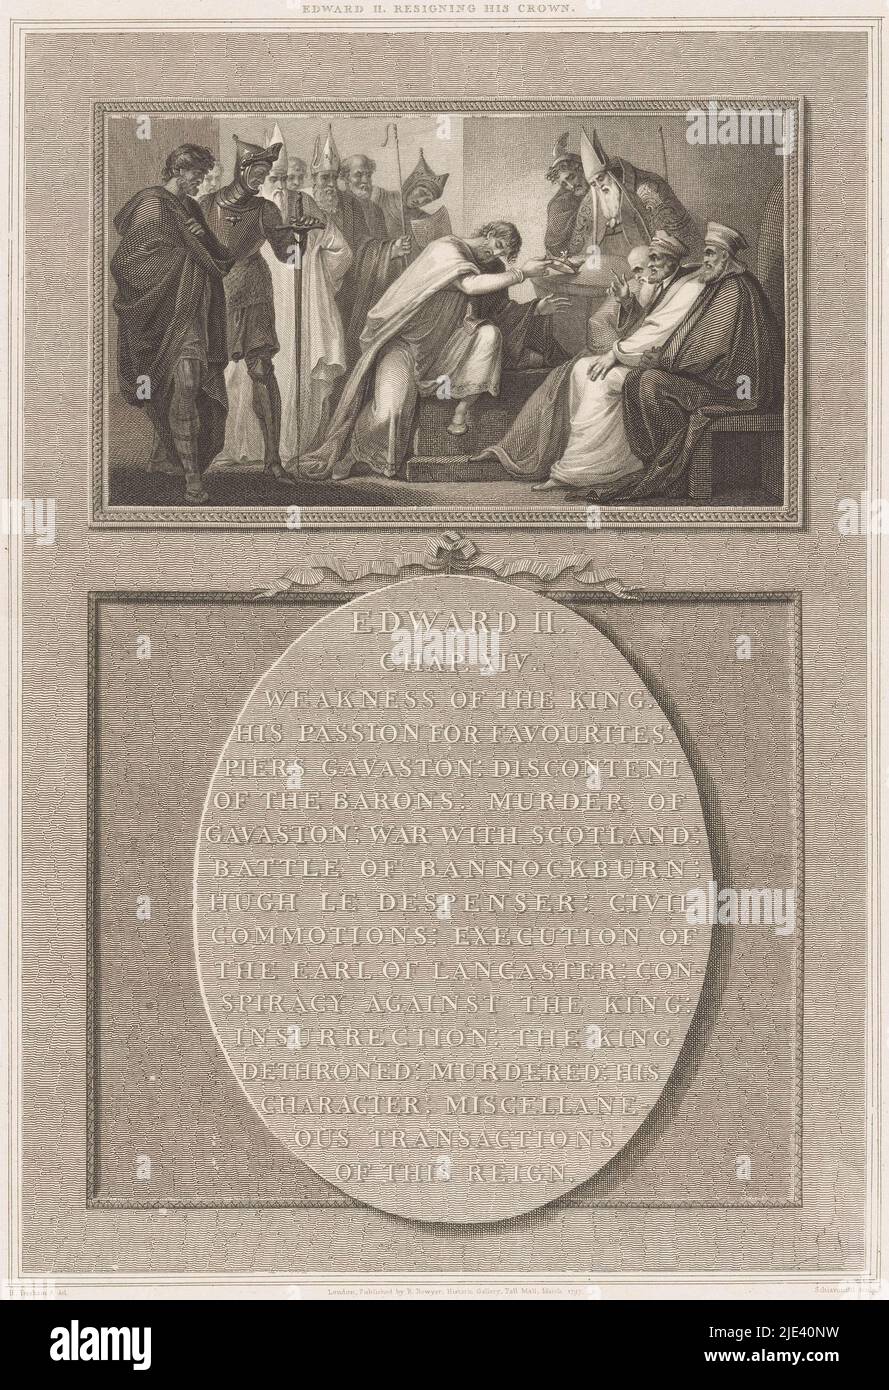 King Edward II of England relinquishing his crown, Luigi Schiavonetti, after Henry Tresham, 1797, Top: King Edward II of England relinquishing his crown. To the right an archbishop and three seated gentlemen. To the left, a knight and other watching figures. Below: fifteen lines of English text in an oval., print maker: Luigi Schiavonetti, (mentioned on object), intermediary draughtsman: Henry Tresham, (mentioned on object), publisher: Robert Bowyer, (mentioned on object), London, 1797, paper, etching, engraving, h 486 mm × w 370 mm Stock Photo